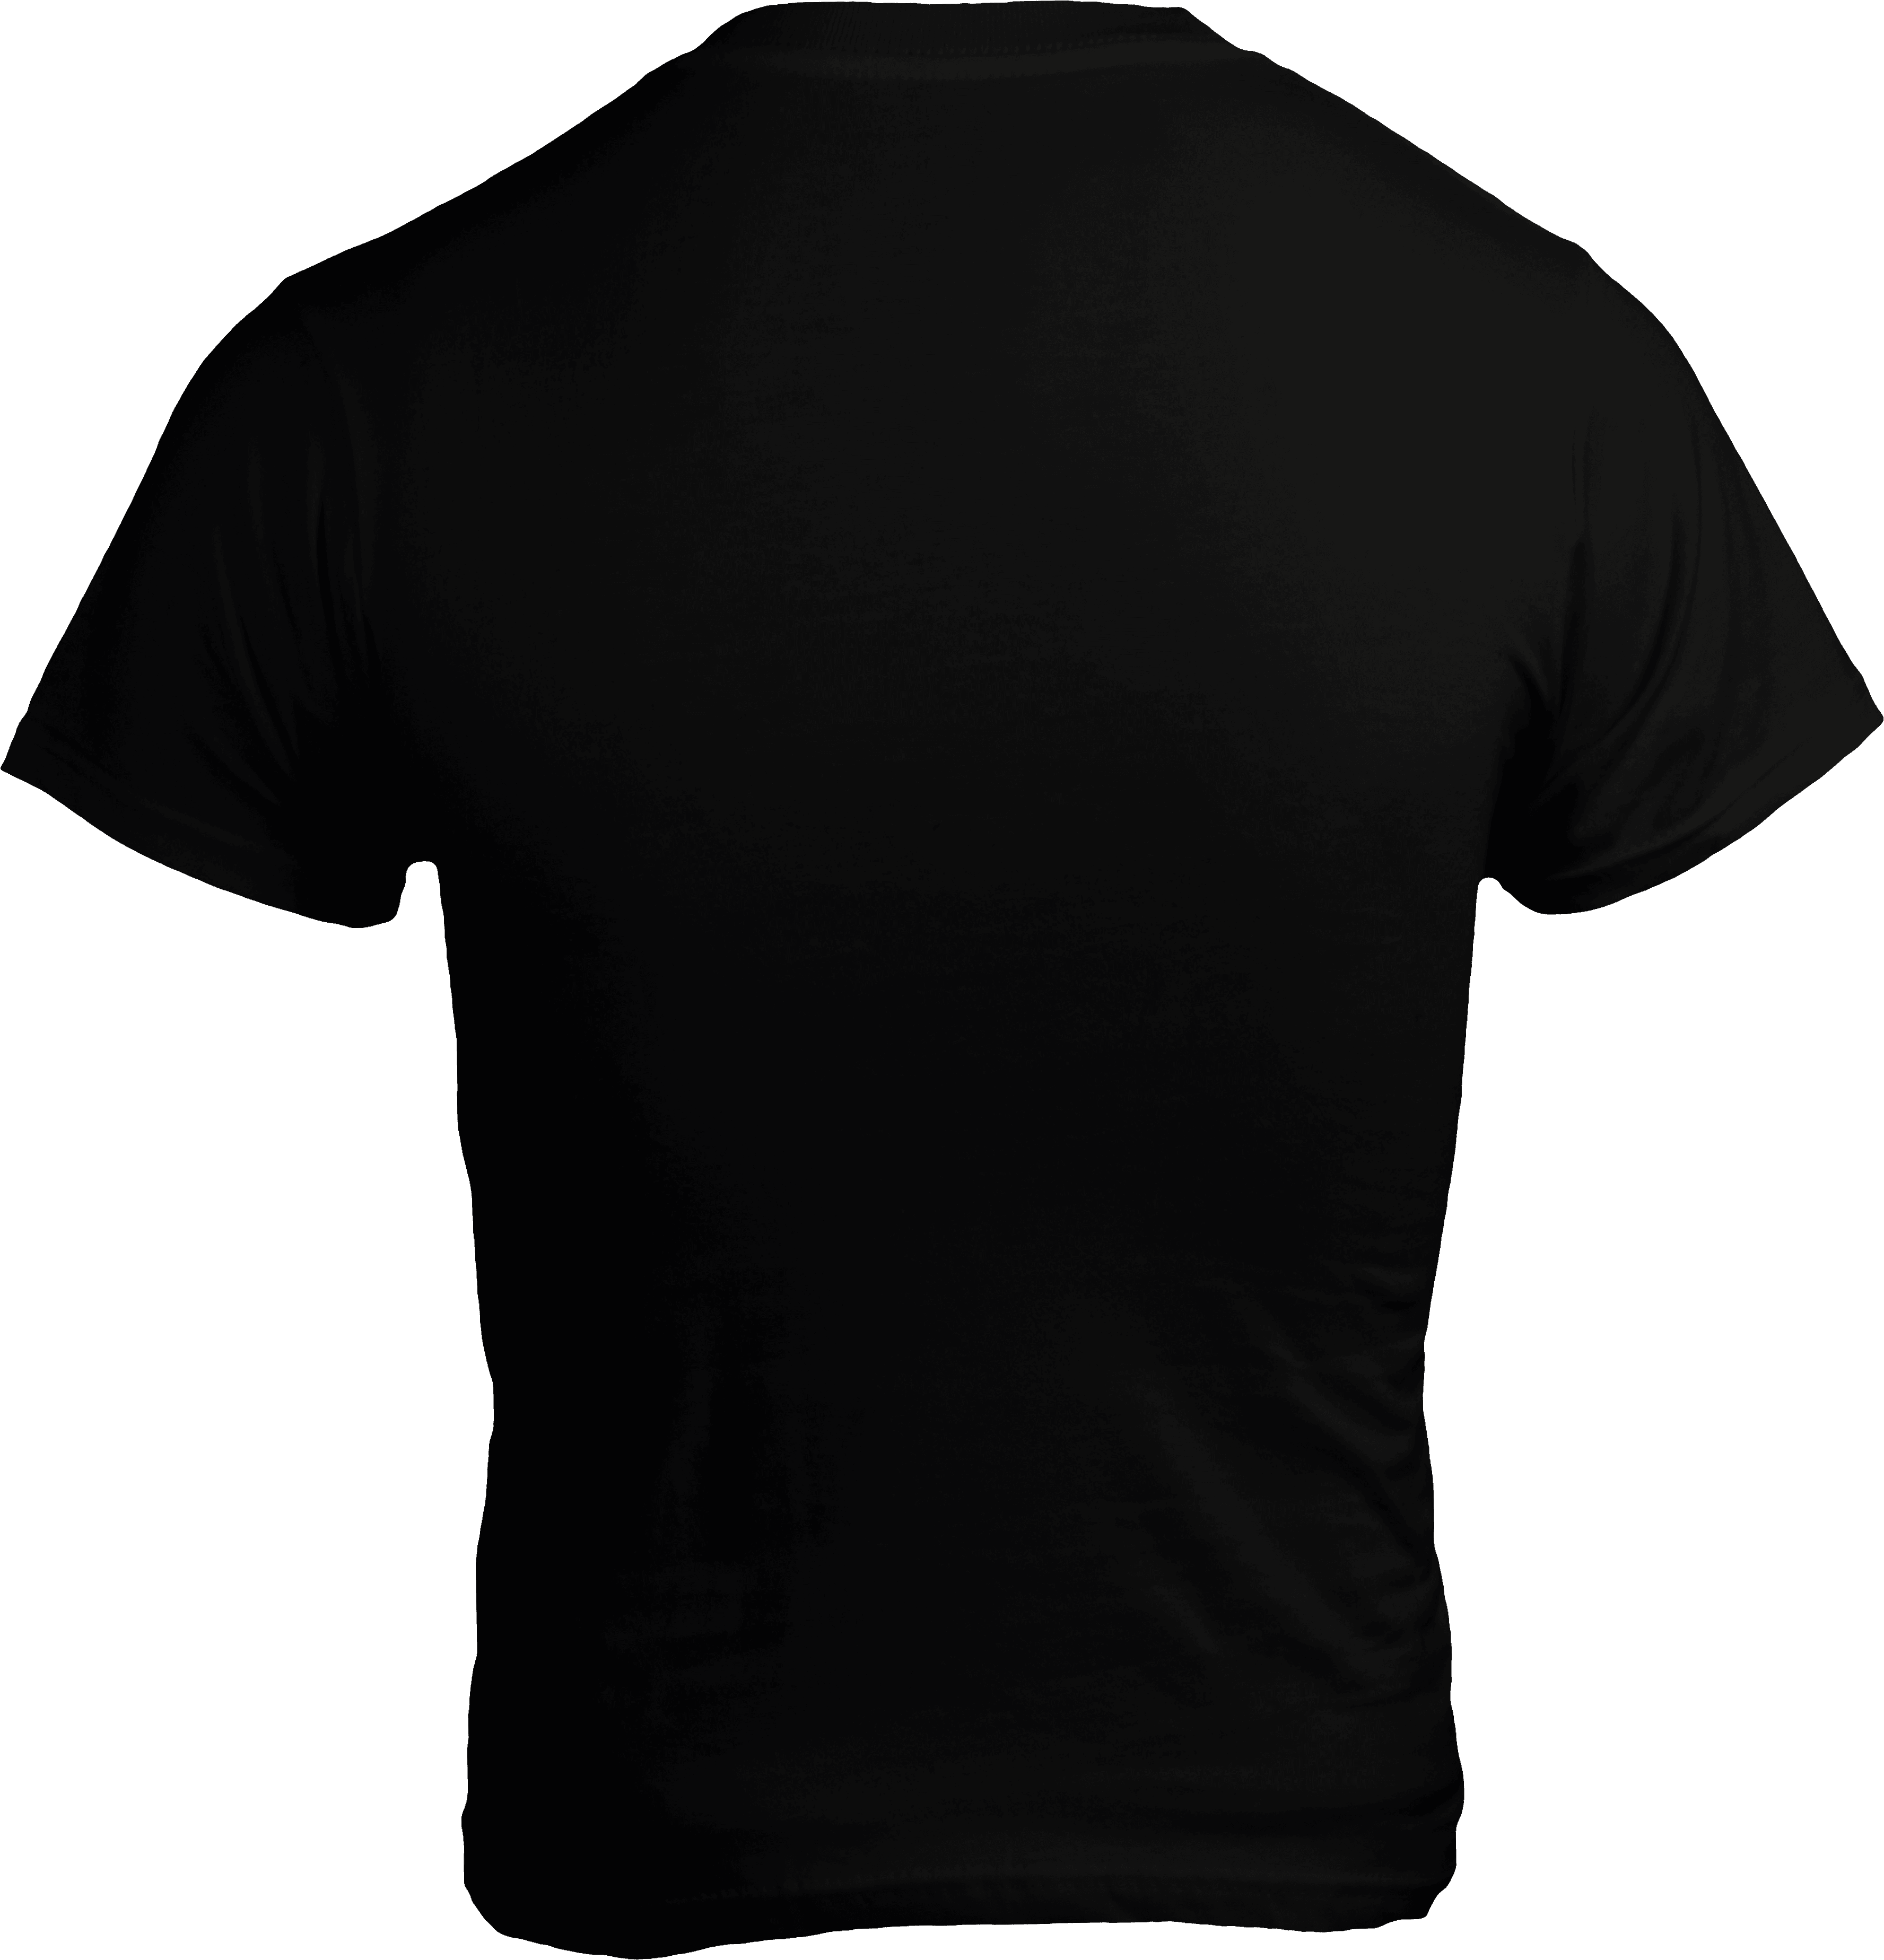 Police, Black T-Shirt with Gray and Blue Graphic - 5% Nutrition